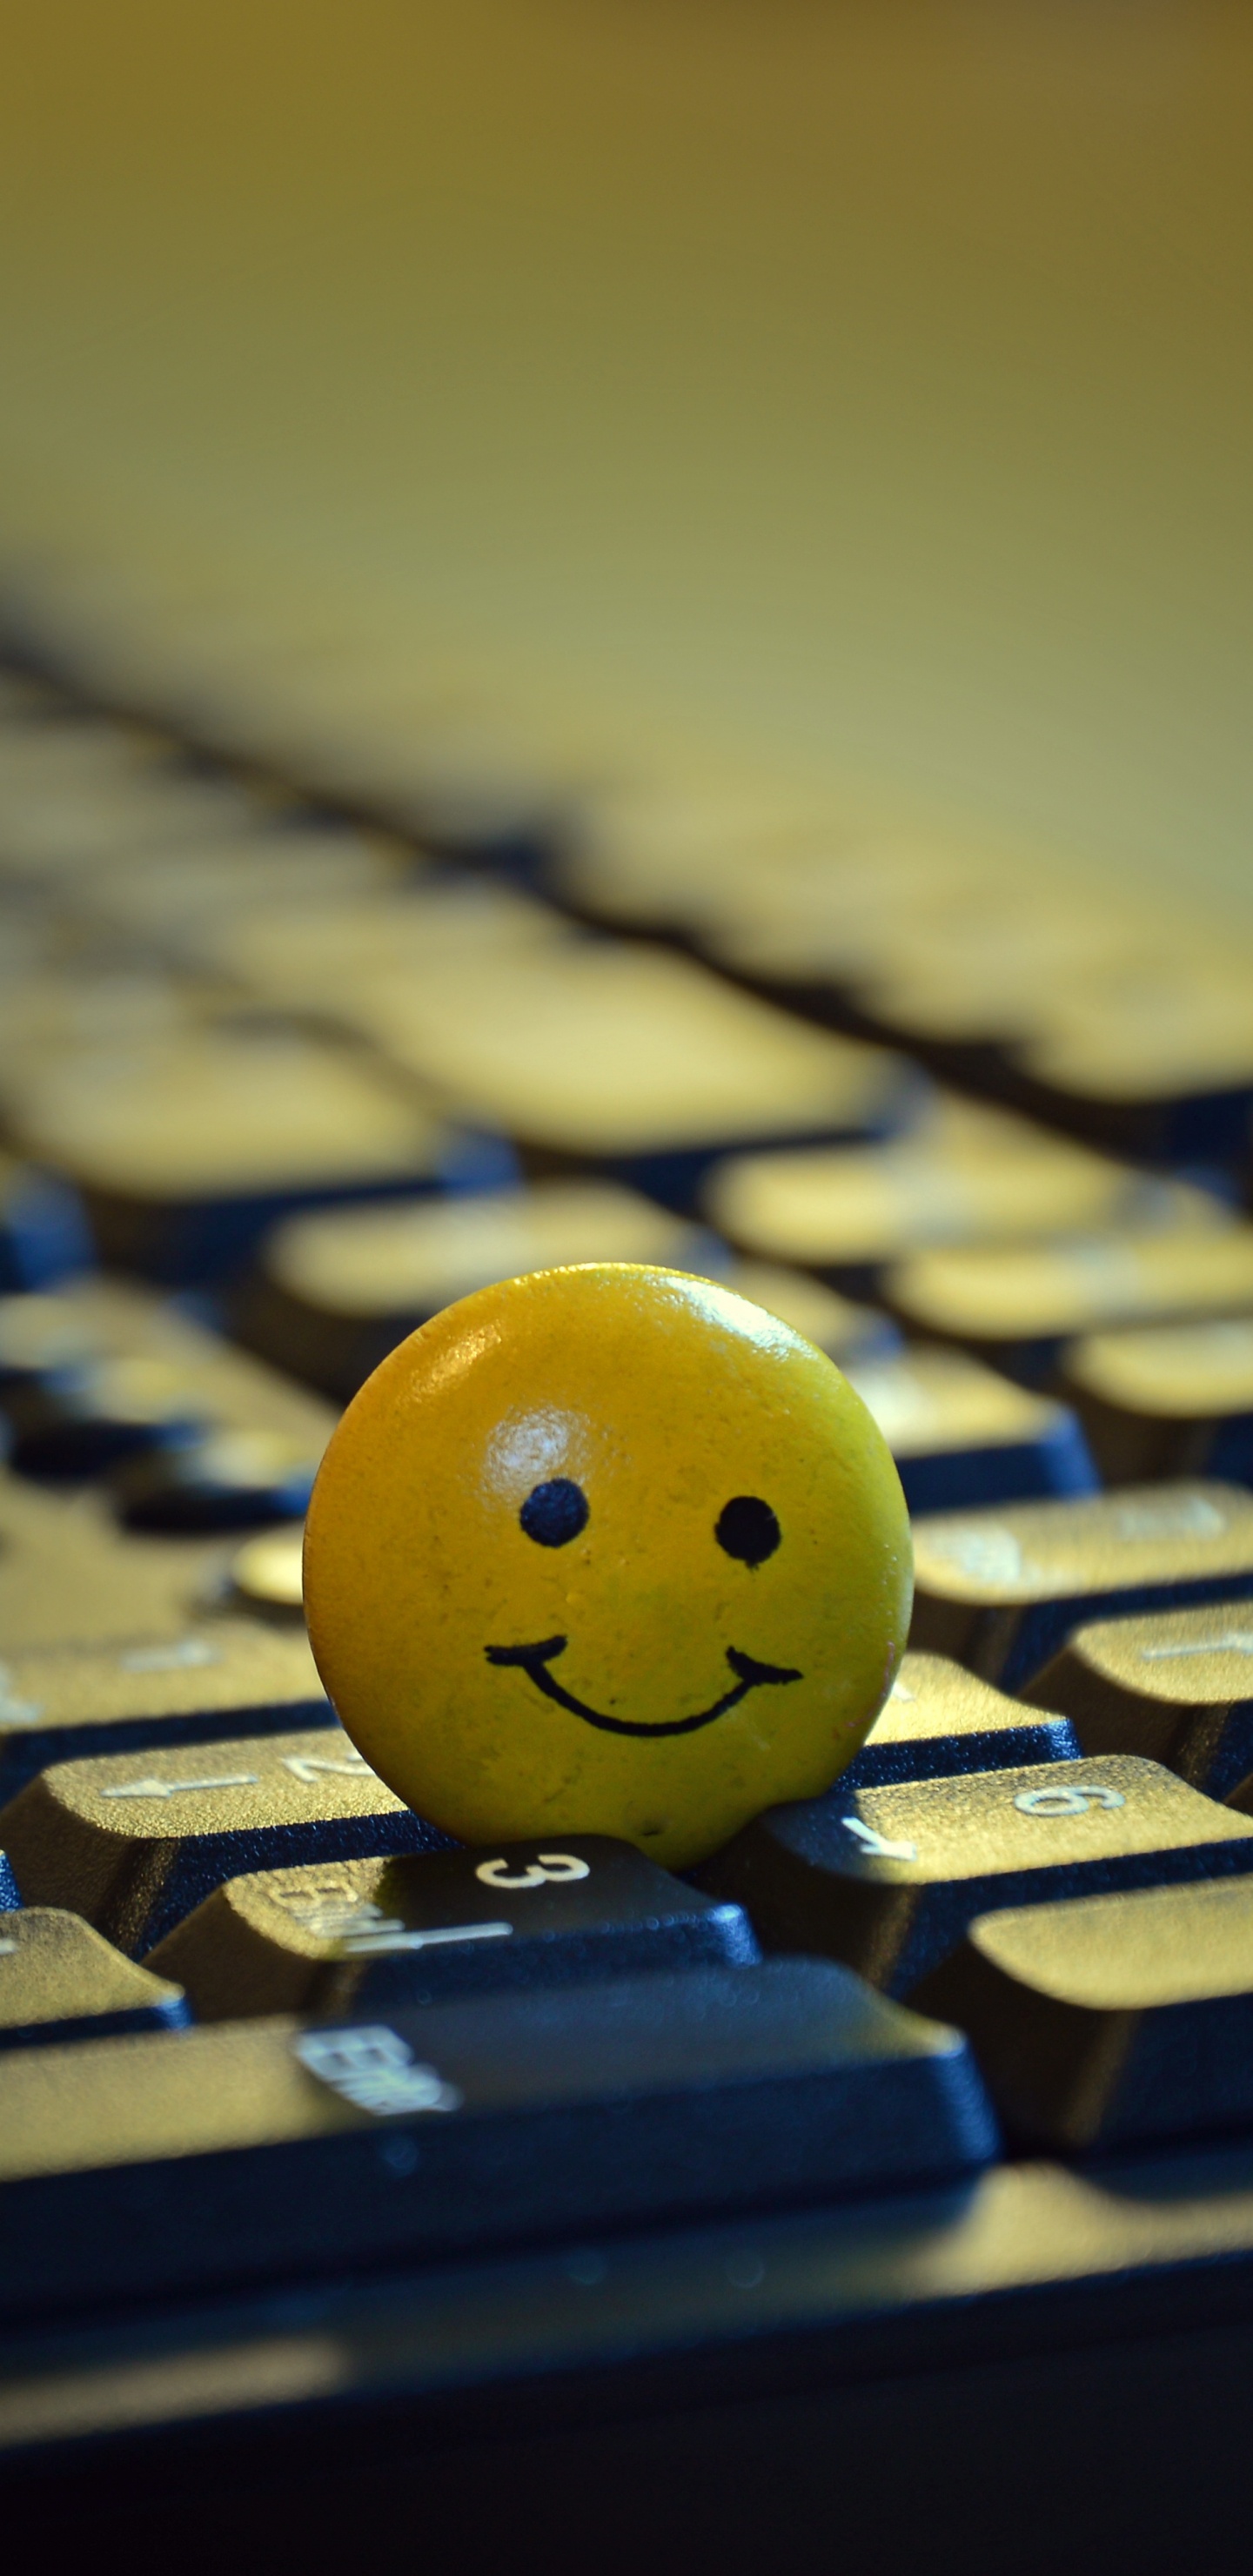 Yellow Smiley Ball on Black Computer Keyboard. Wallpaper in 1440x2960 Resolution